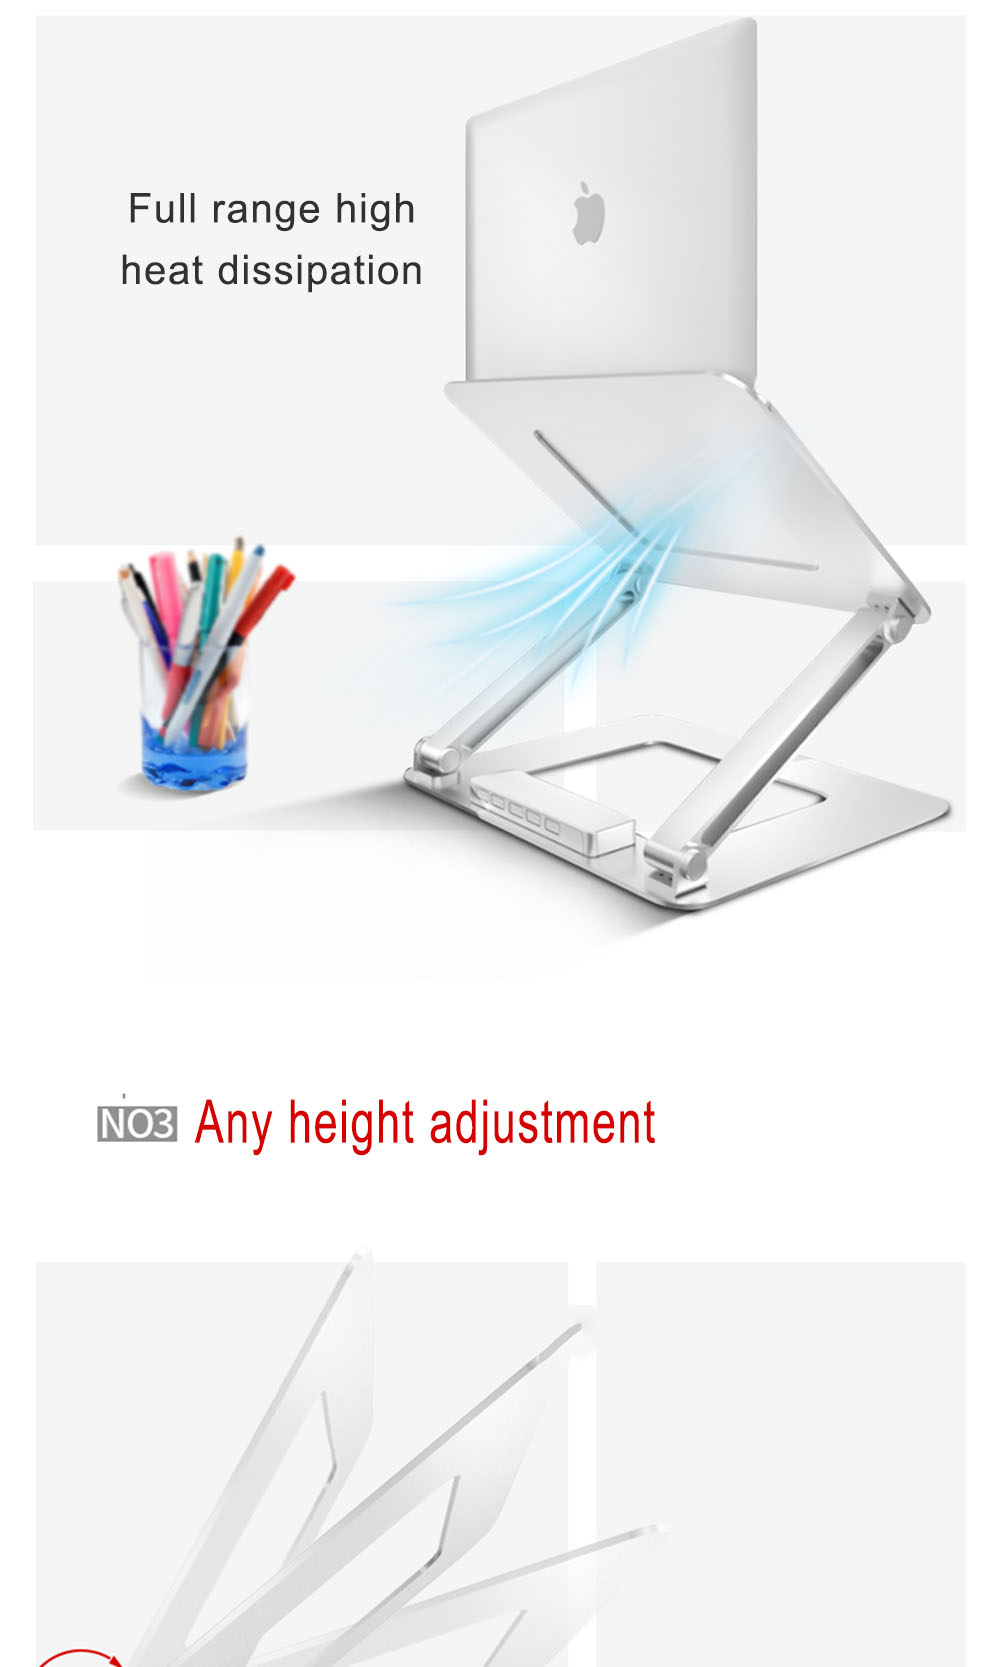 iDock-N37-3-Laptop-Stand-with-USB-30-Interface-Portable-Bracket-Foldable-Aluminum-Alloy-Computer-Hea-1725642-2